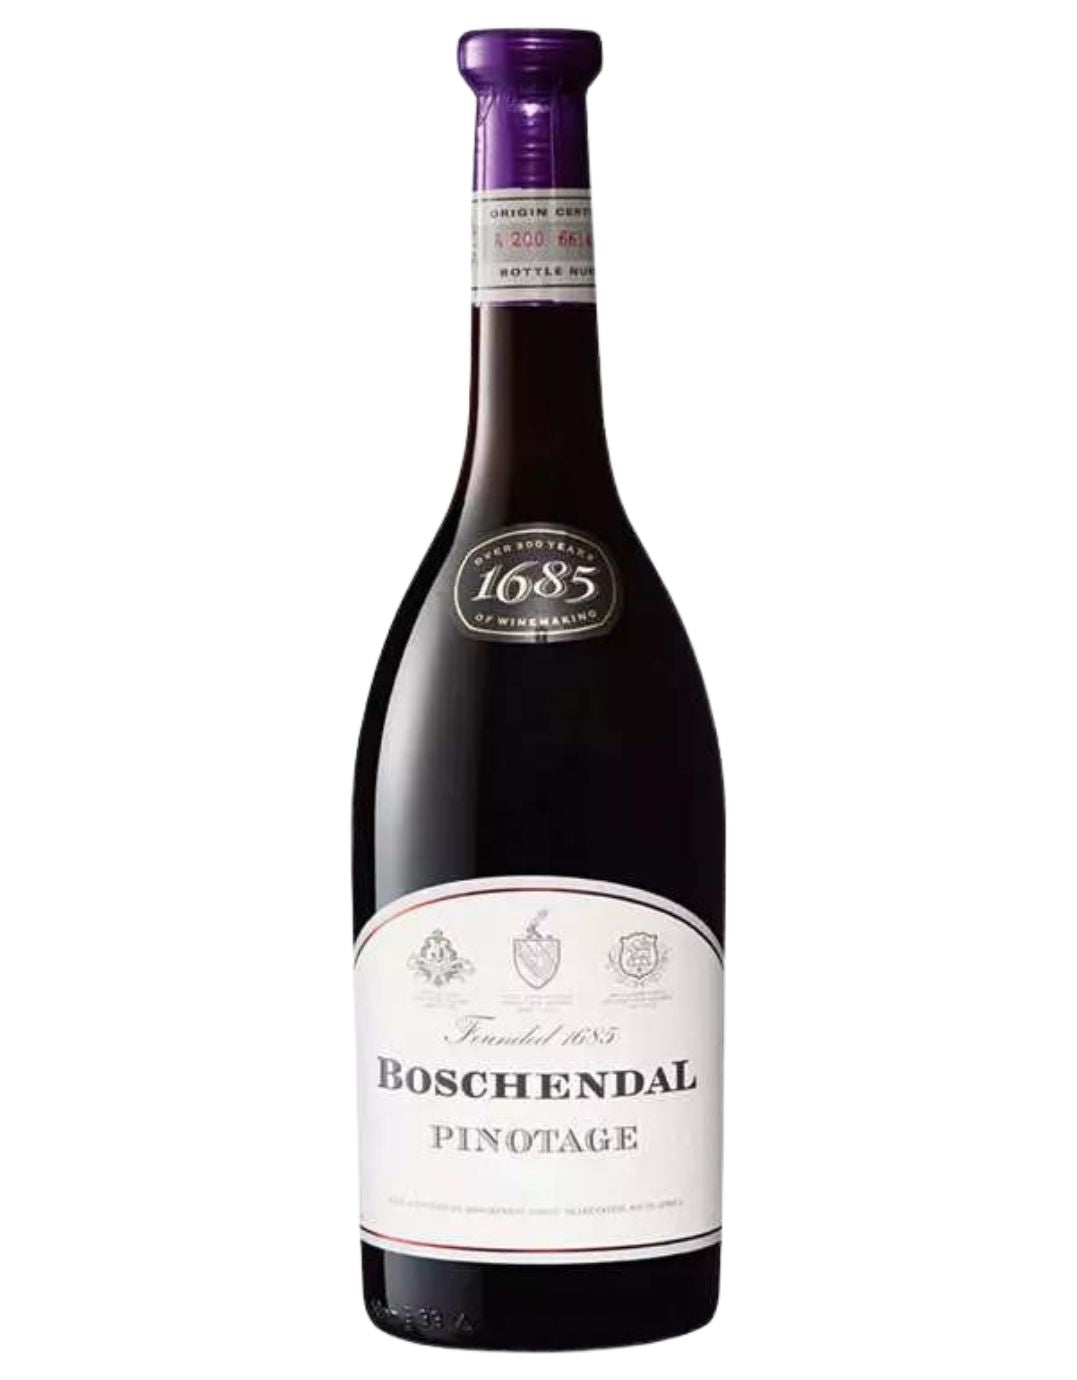 WineStore Pinotage 2019 - Boschendal 1685 Buy now The online